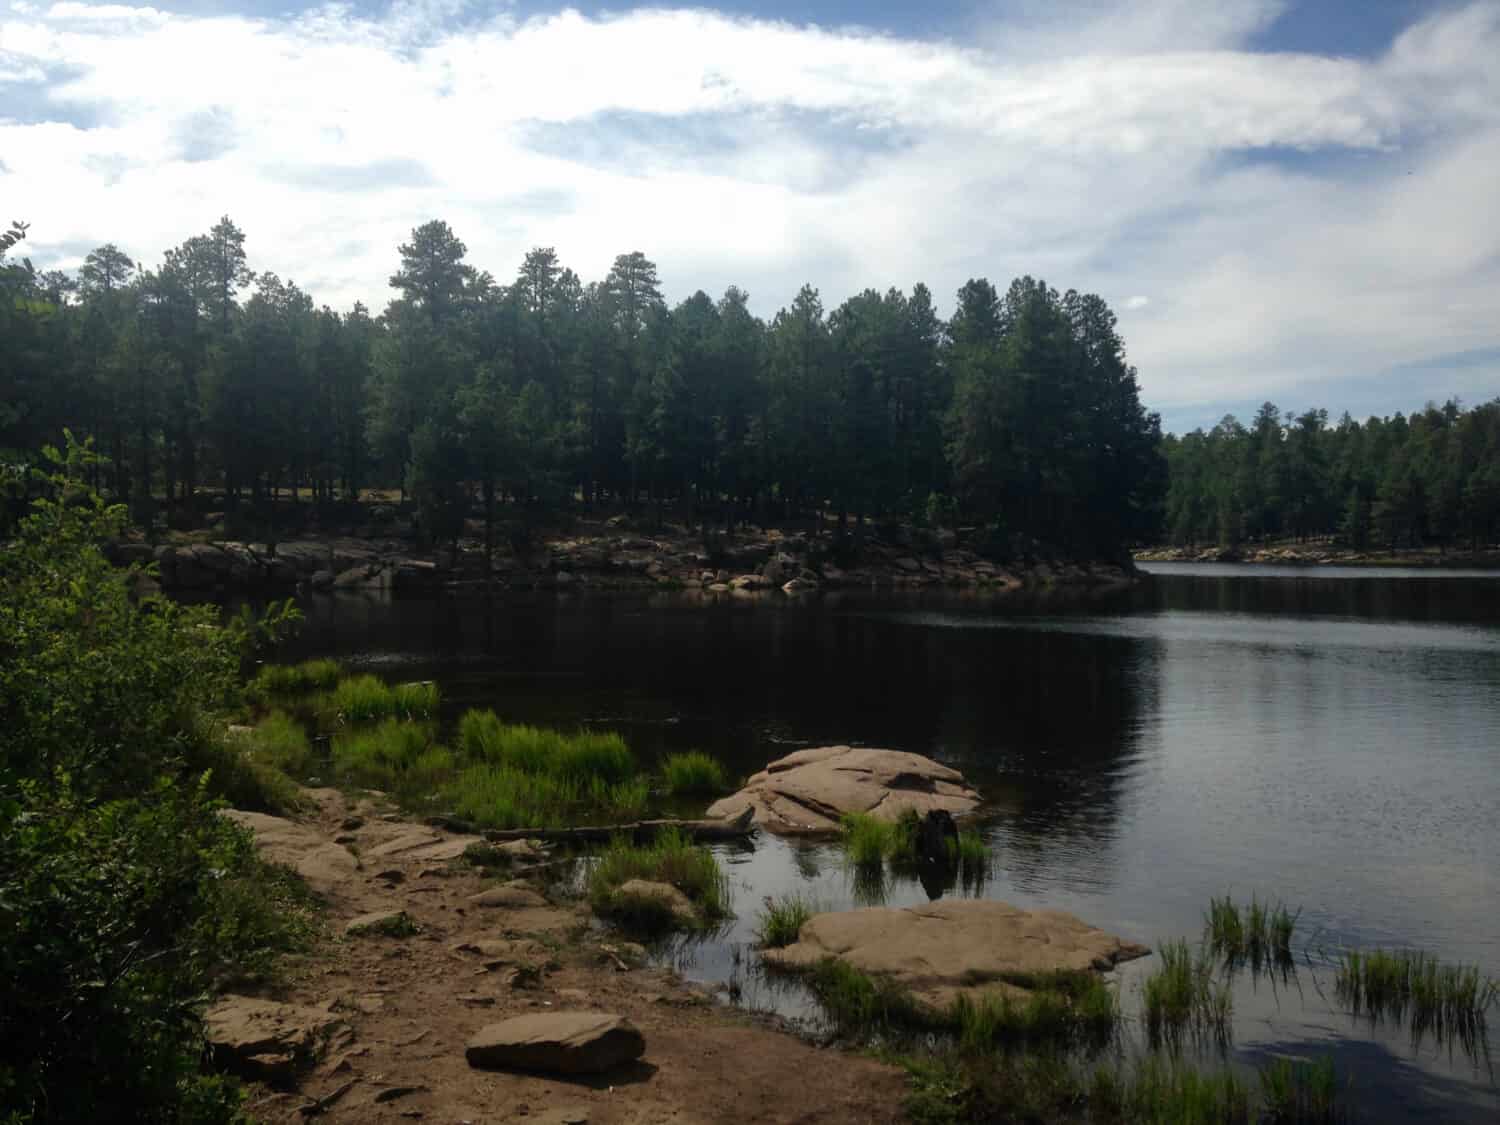 Summertime at Woods Canyon Lake on the Mogollon Rim in the Apache Sitgreaves National Forest, northern Arizona